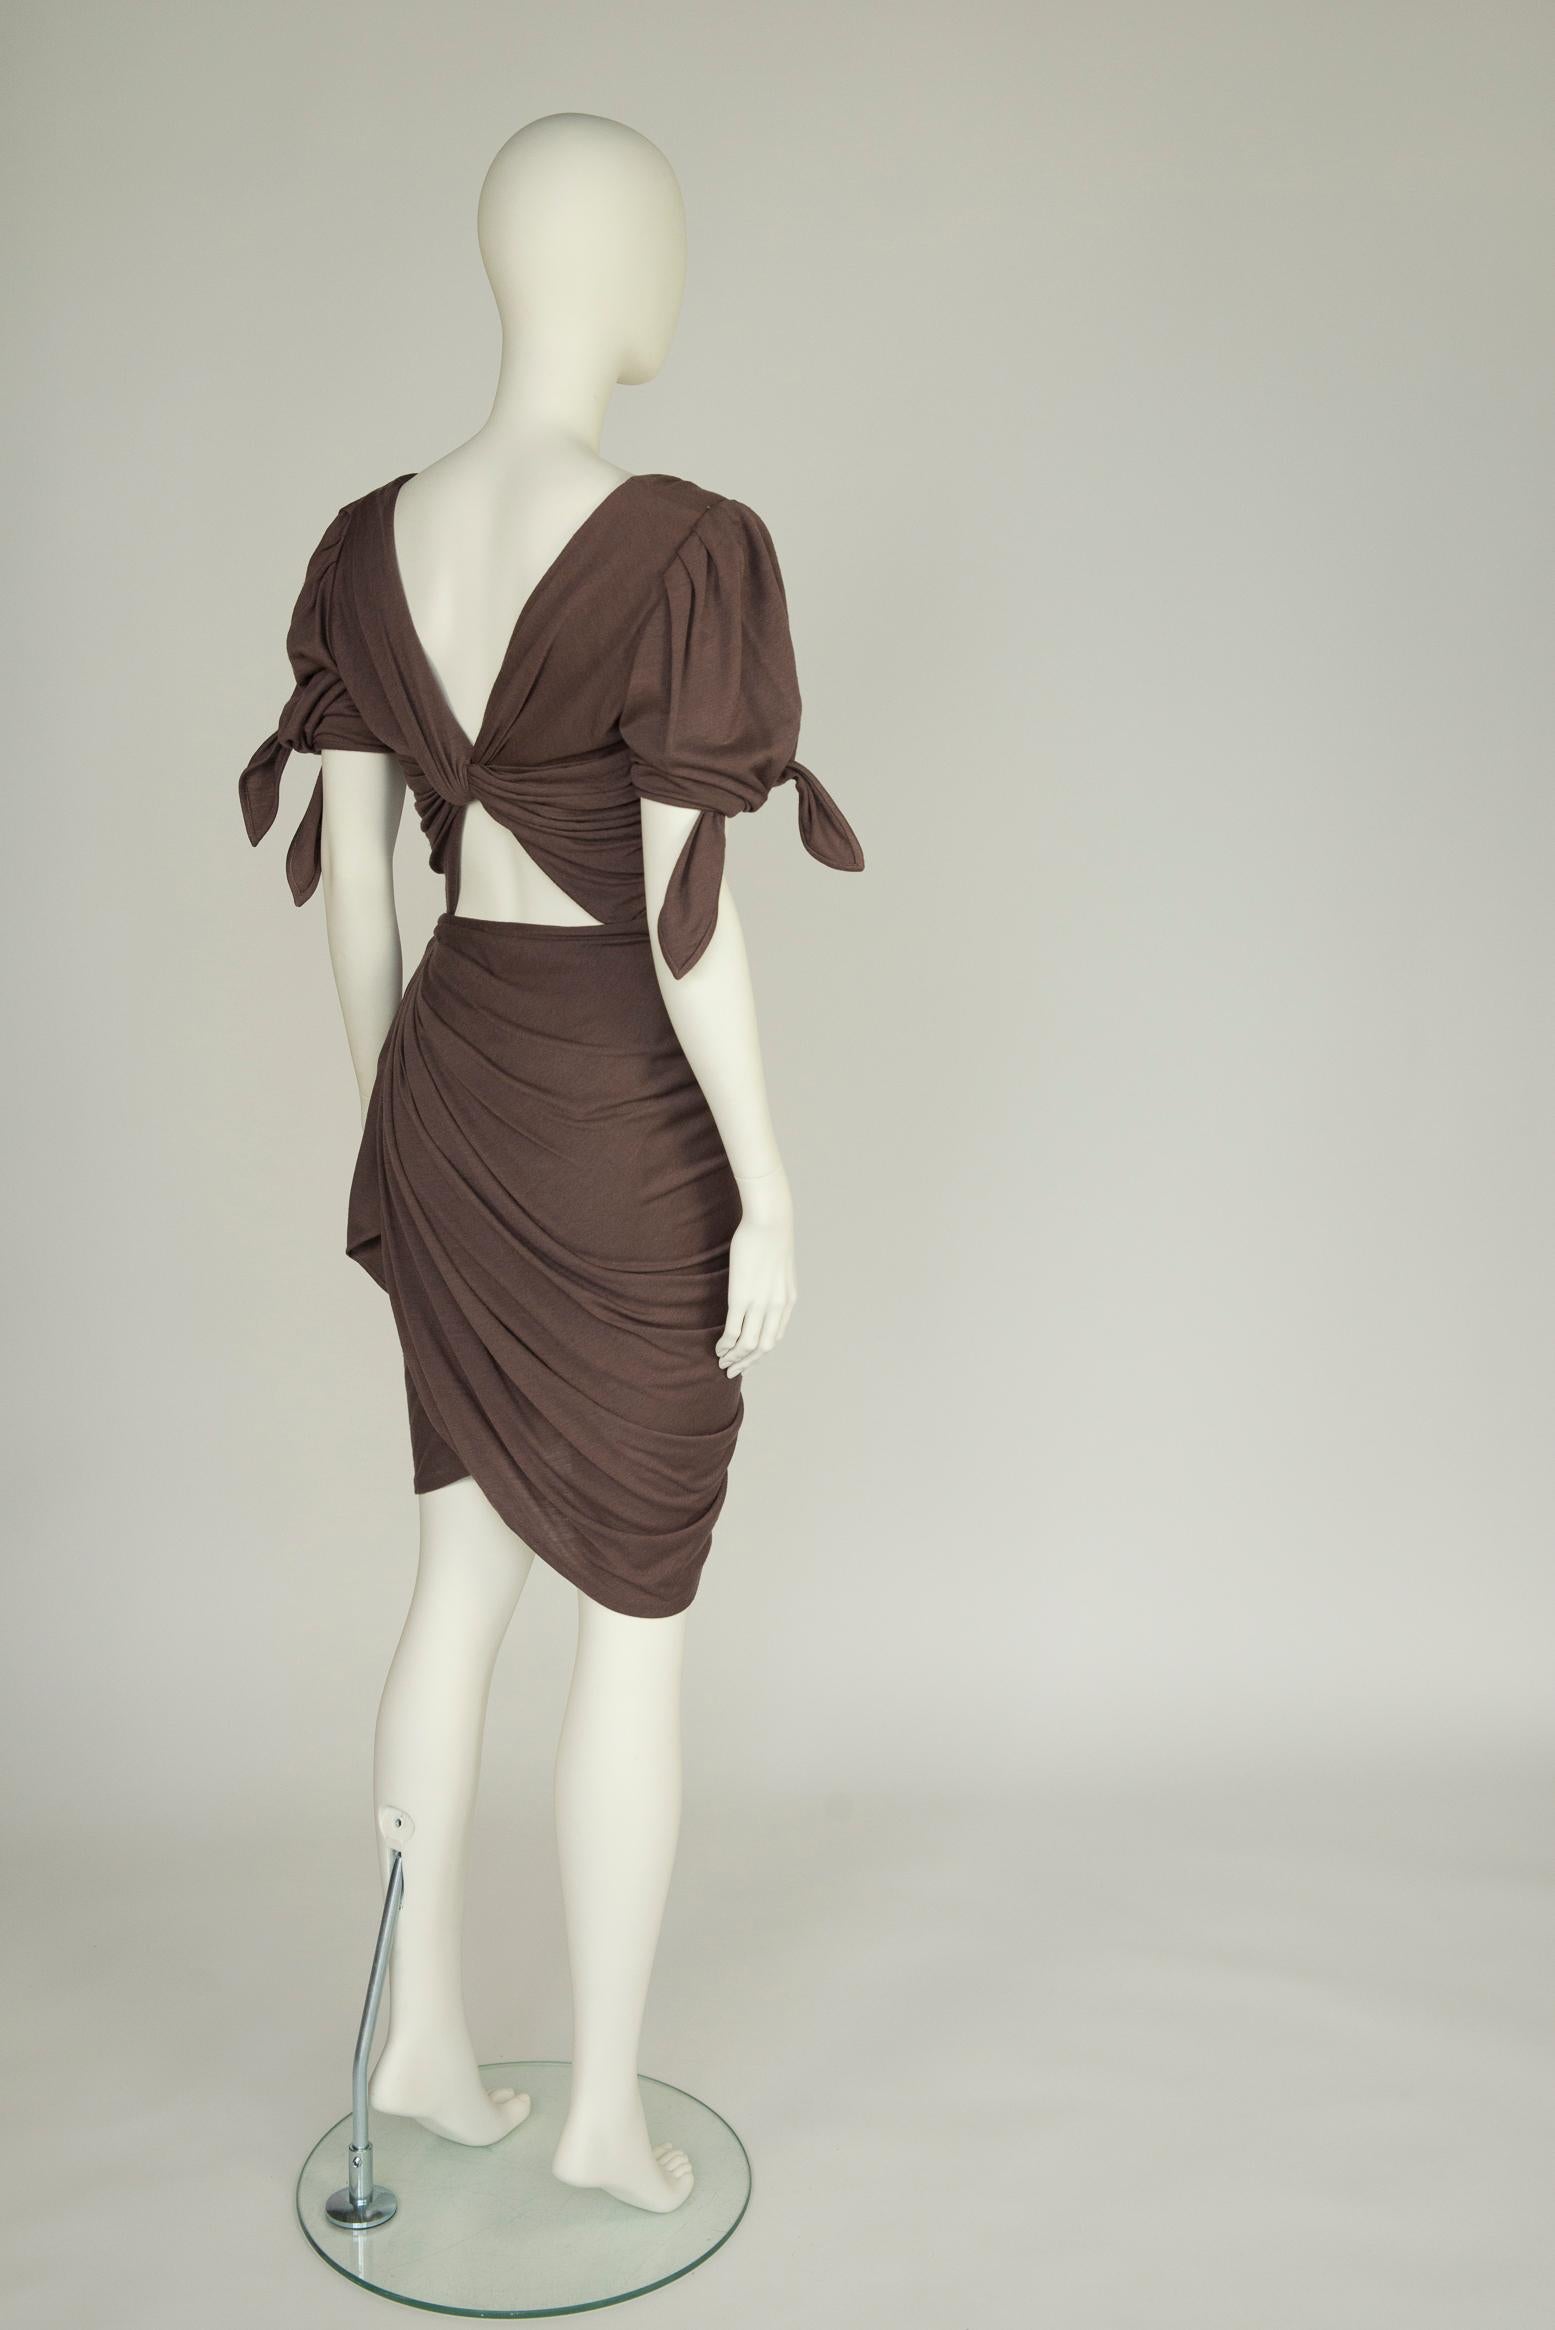 Emanuel Ungaro Draped Knotted Cut-Out Cocktail Dress, Circa 1985 For Sale 2